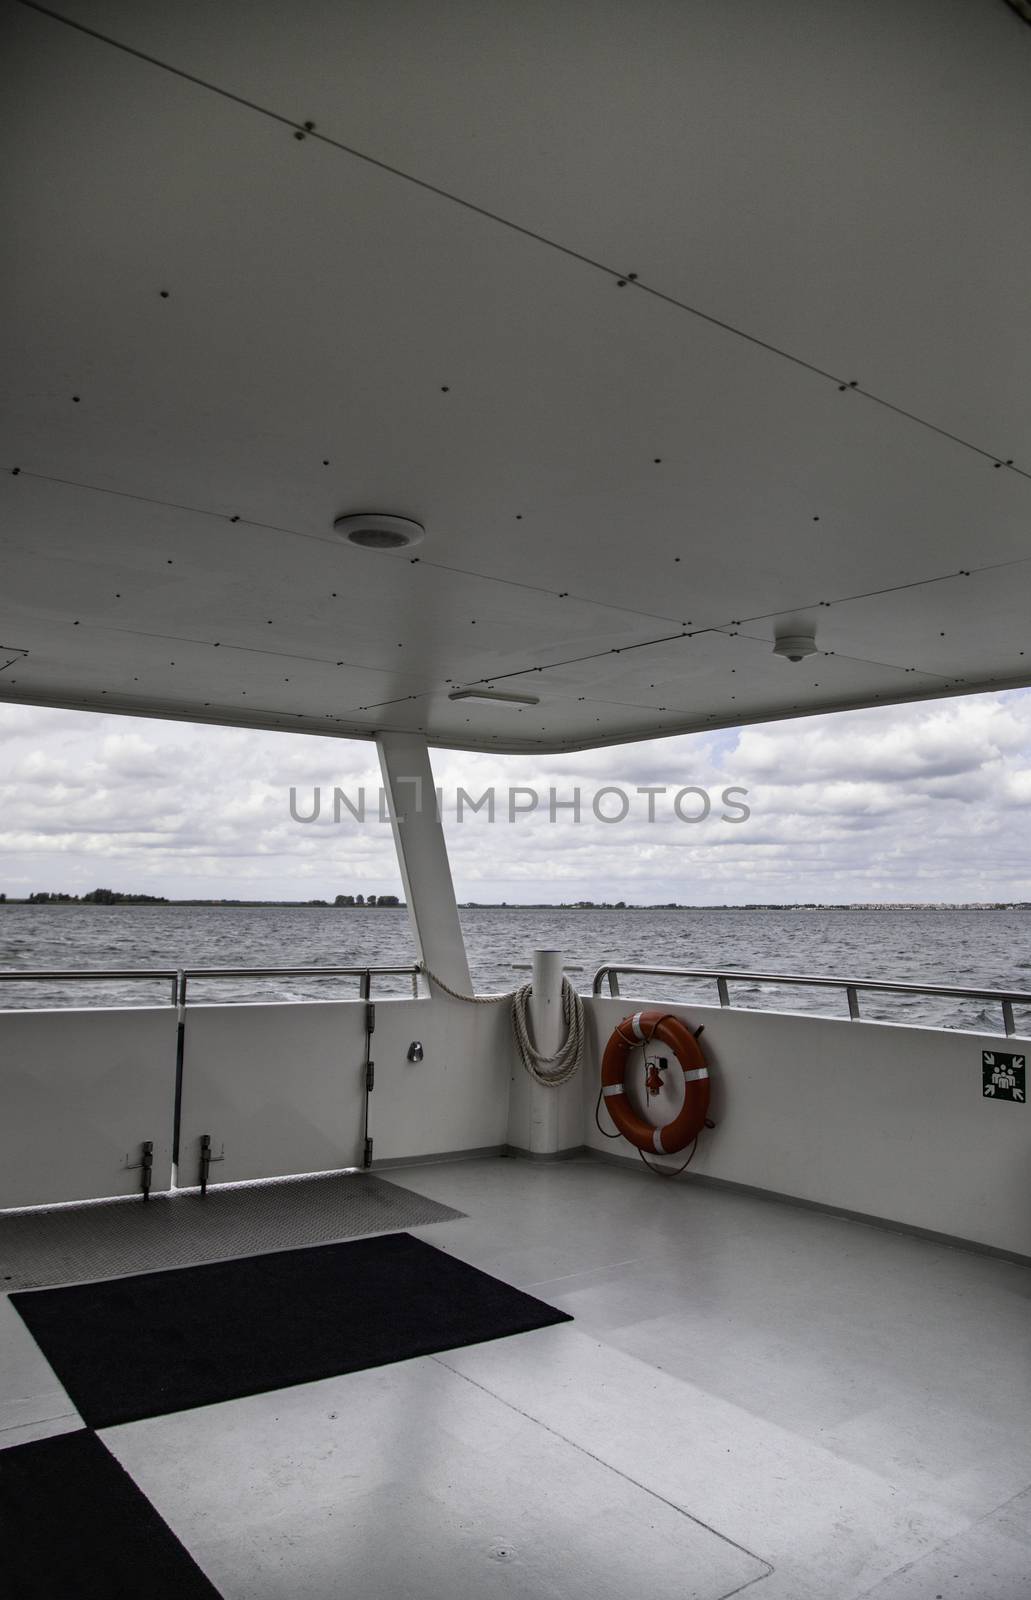 Views of the interior of a ship, maritime transport, cruise